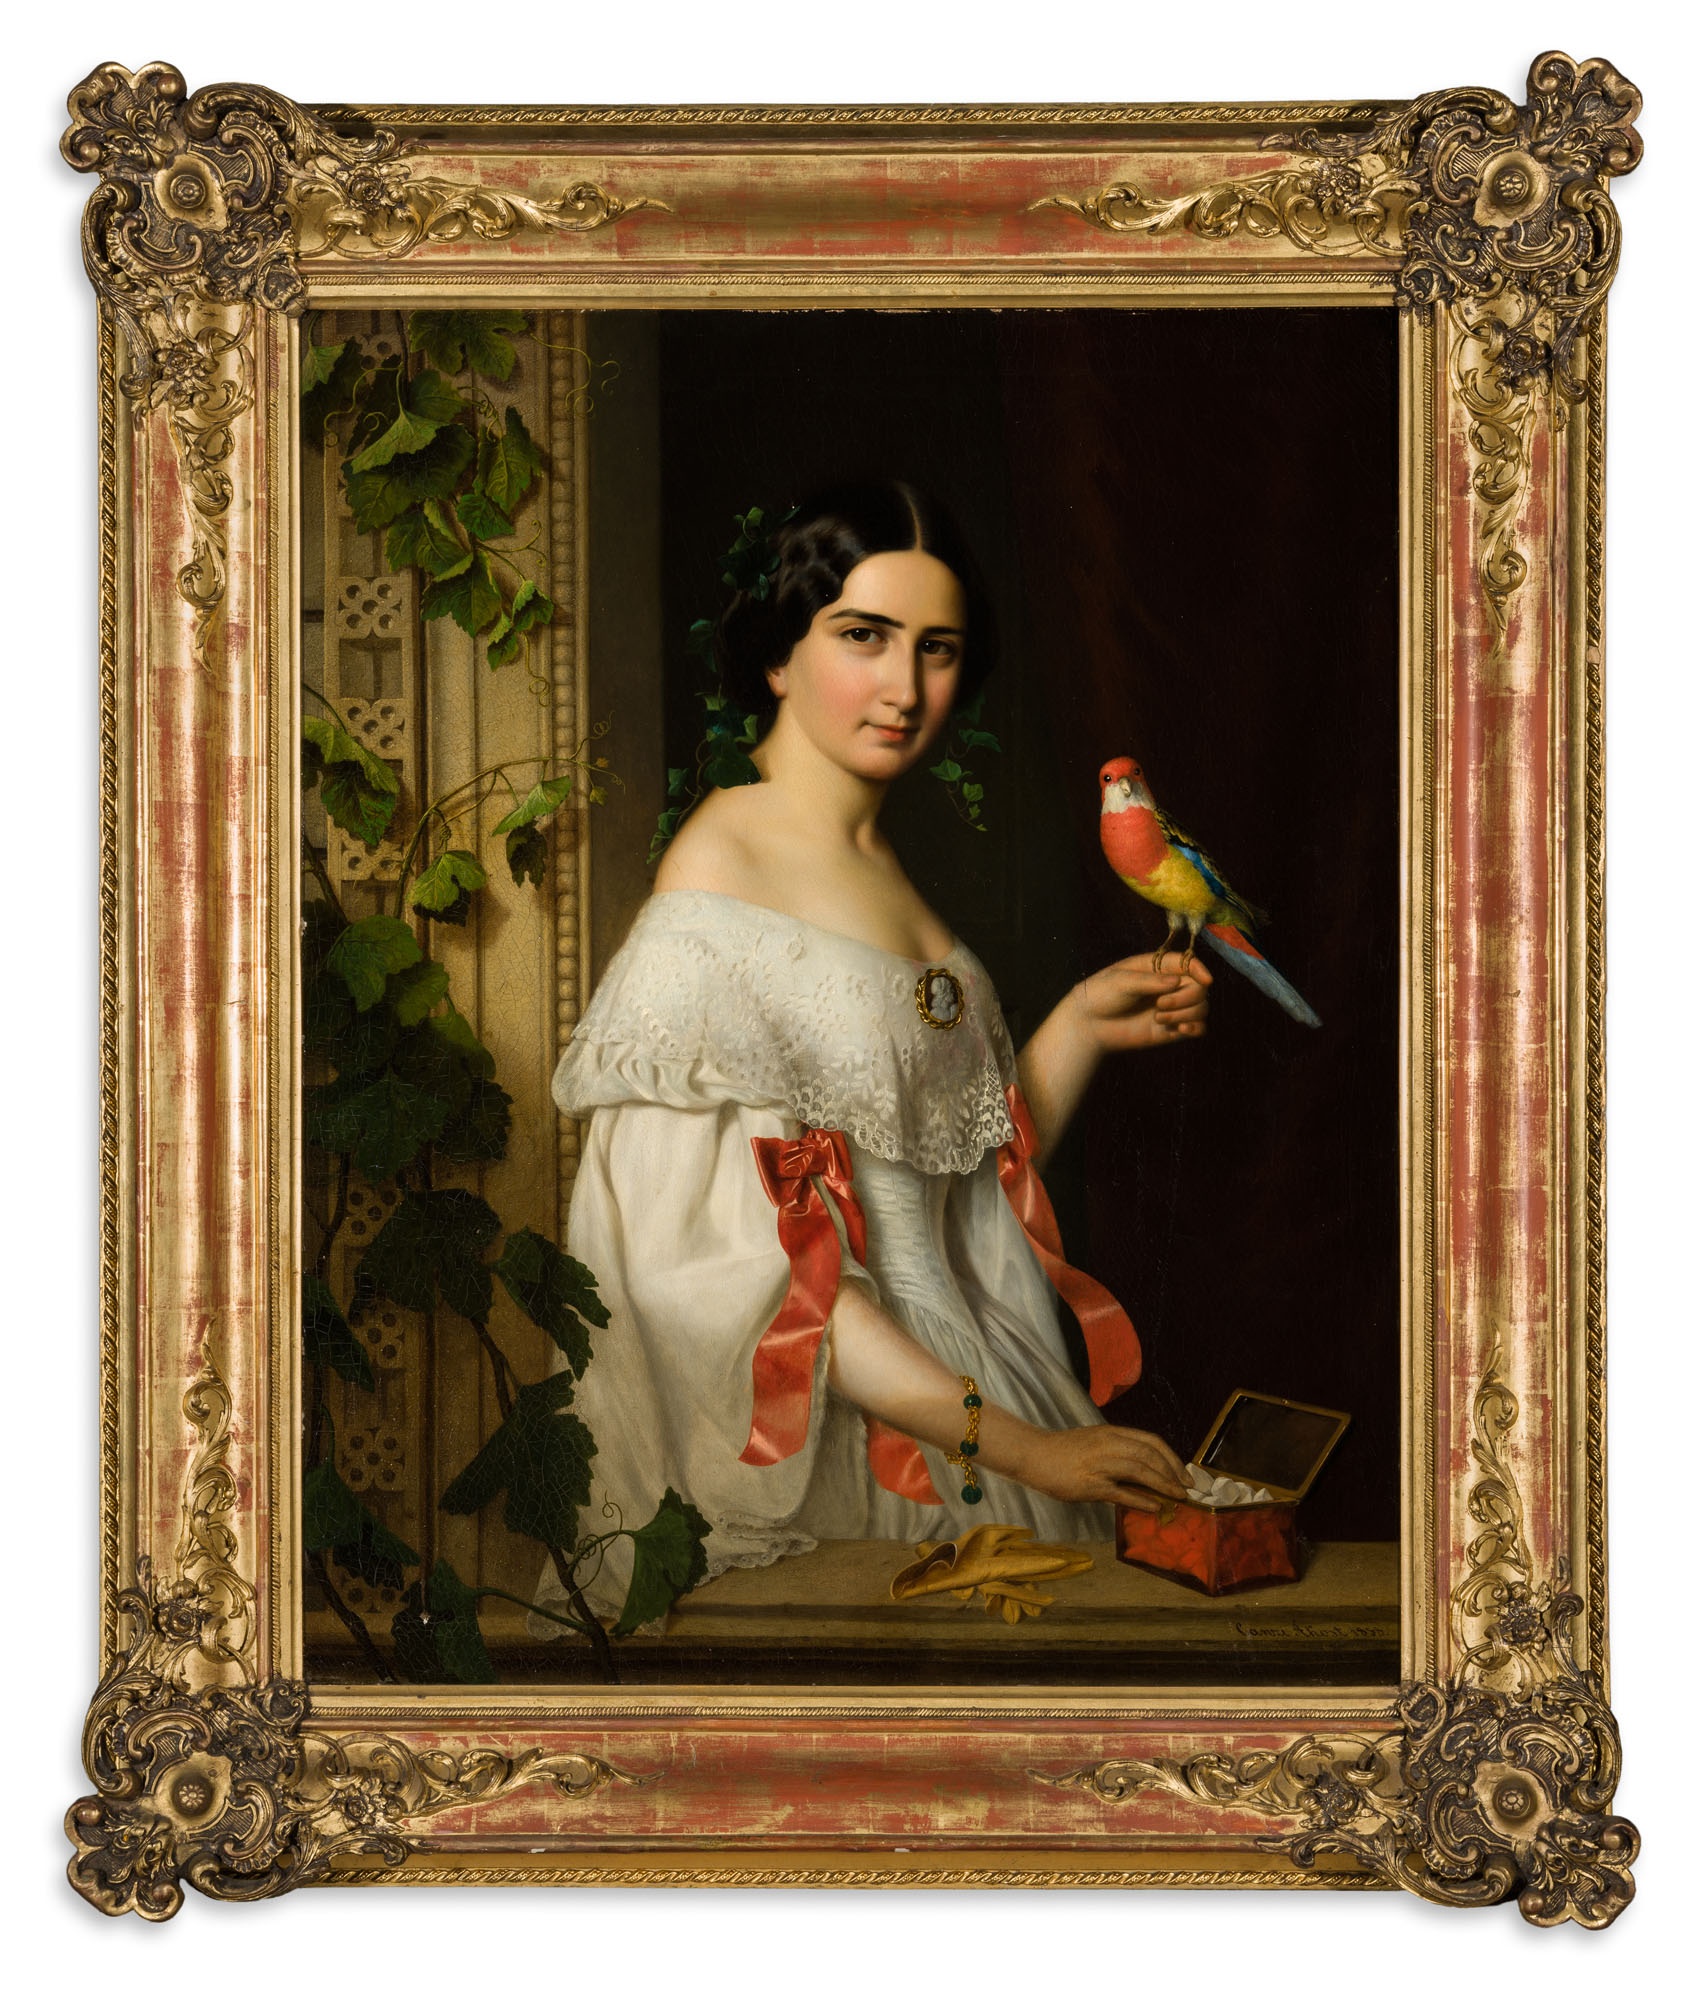 Ágoston Canzi: Lady with a Parakeet (The Salgo Trust for Education CC BY-NC-SA)